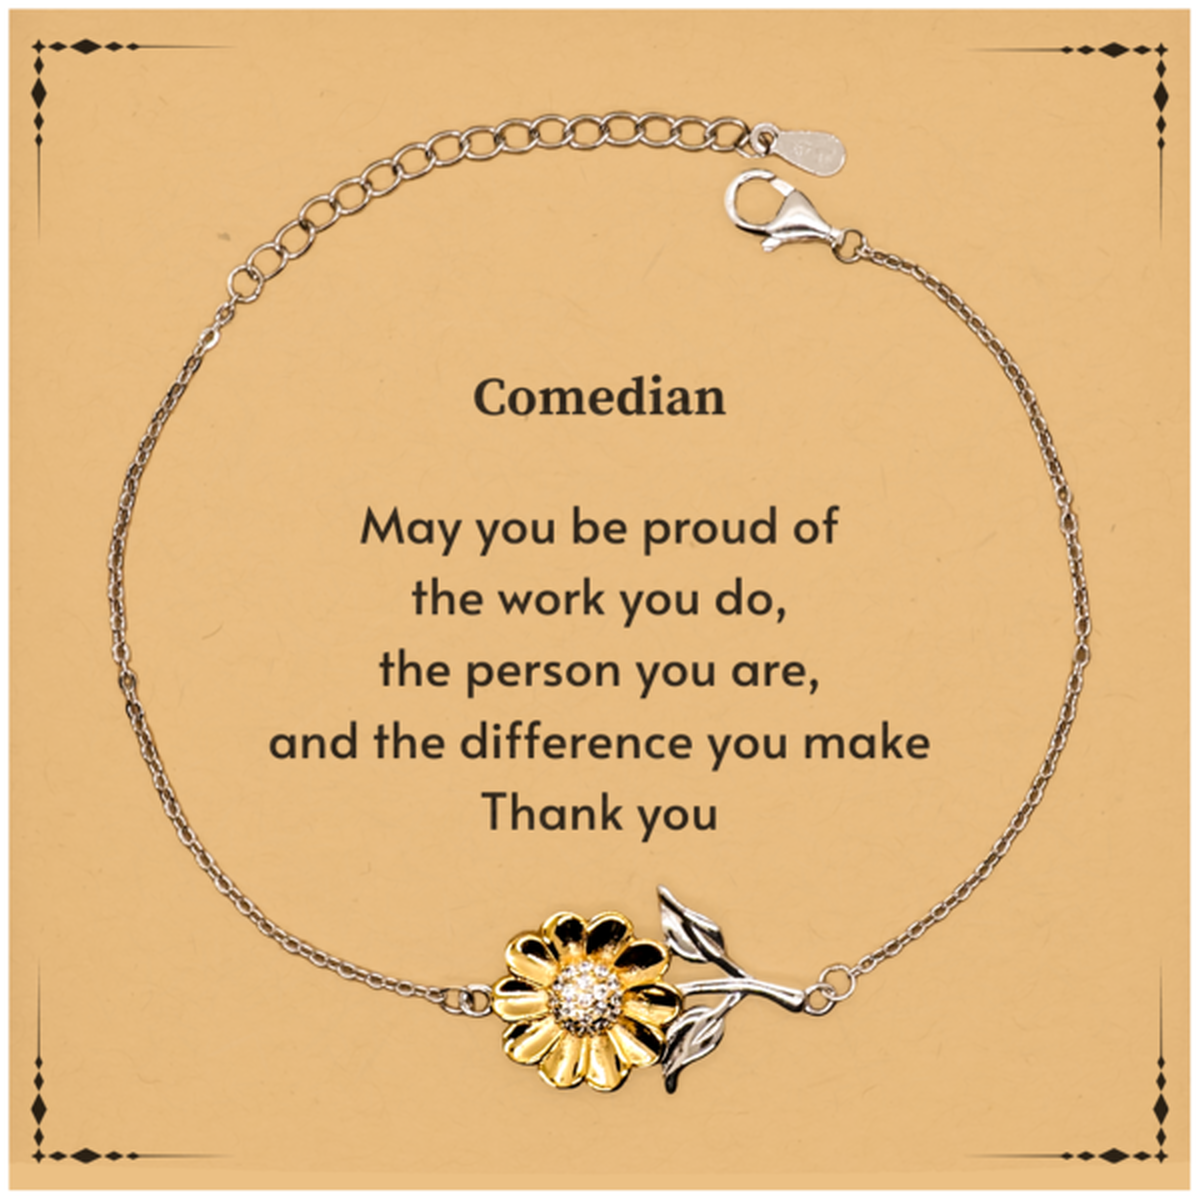 Heartwarming Sunflower Bracelet Retirement Coworkers Gifts for Comedian, Comedian May You be proud of the work you do, the person you are Gifts for Boss Men Women Friends